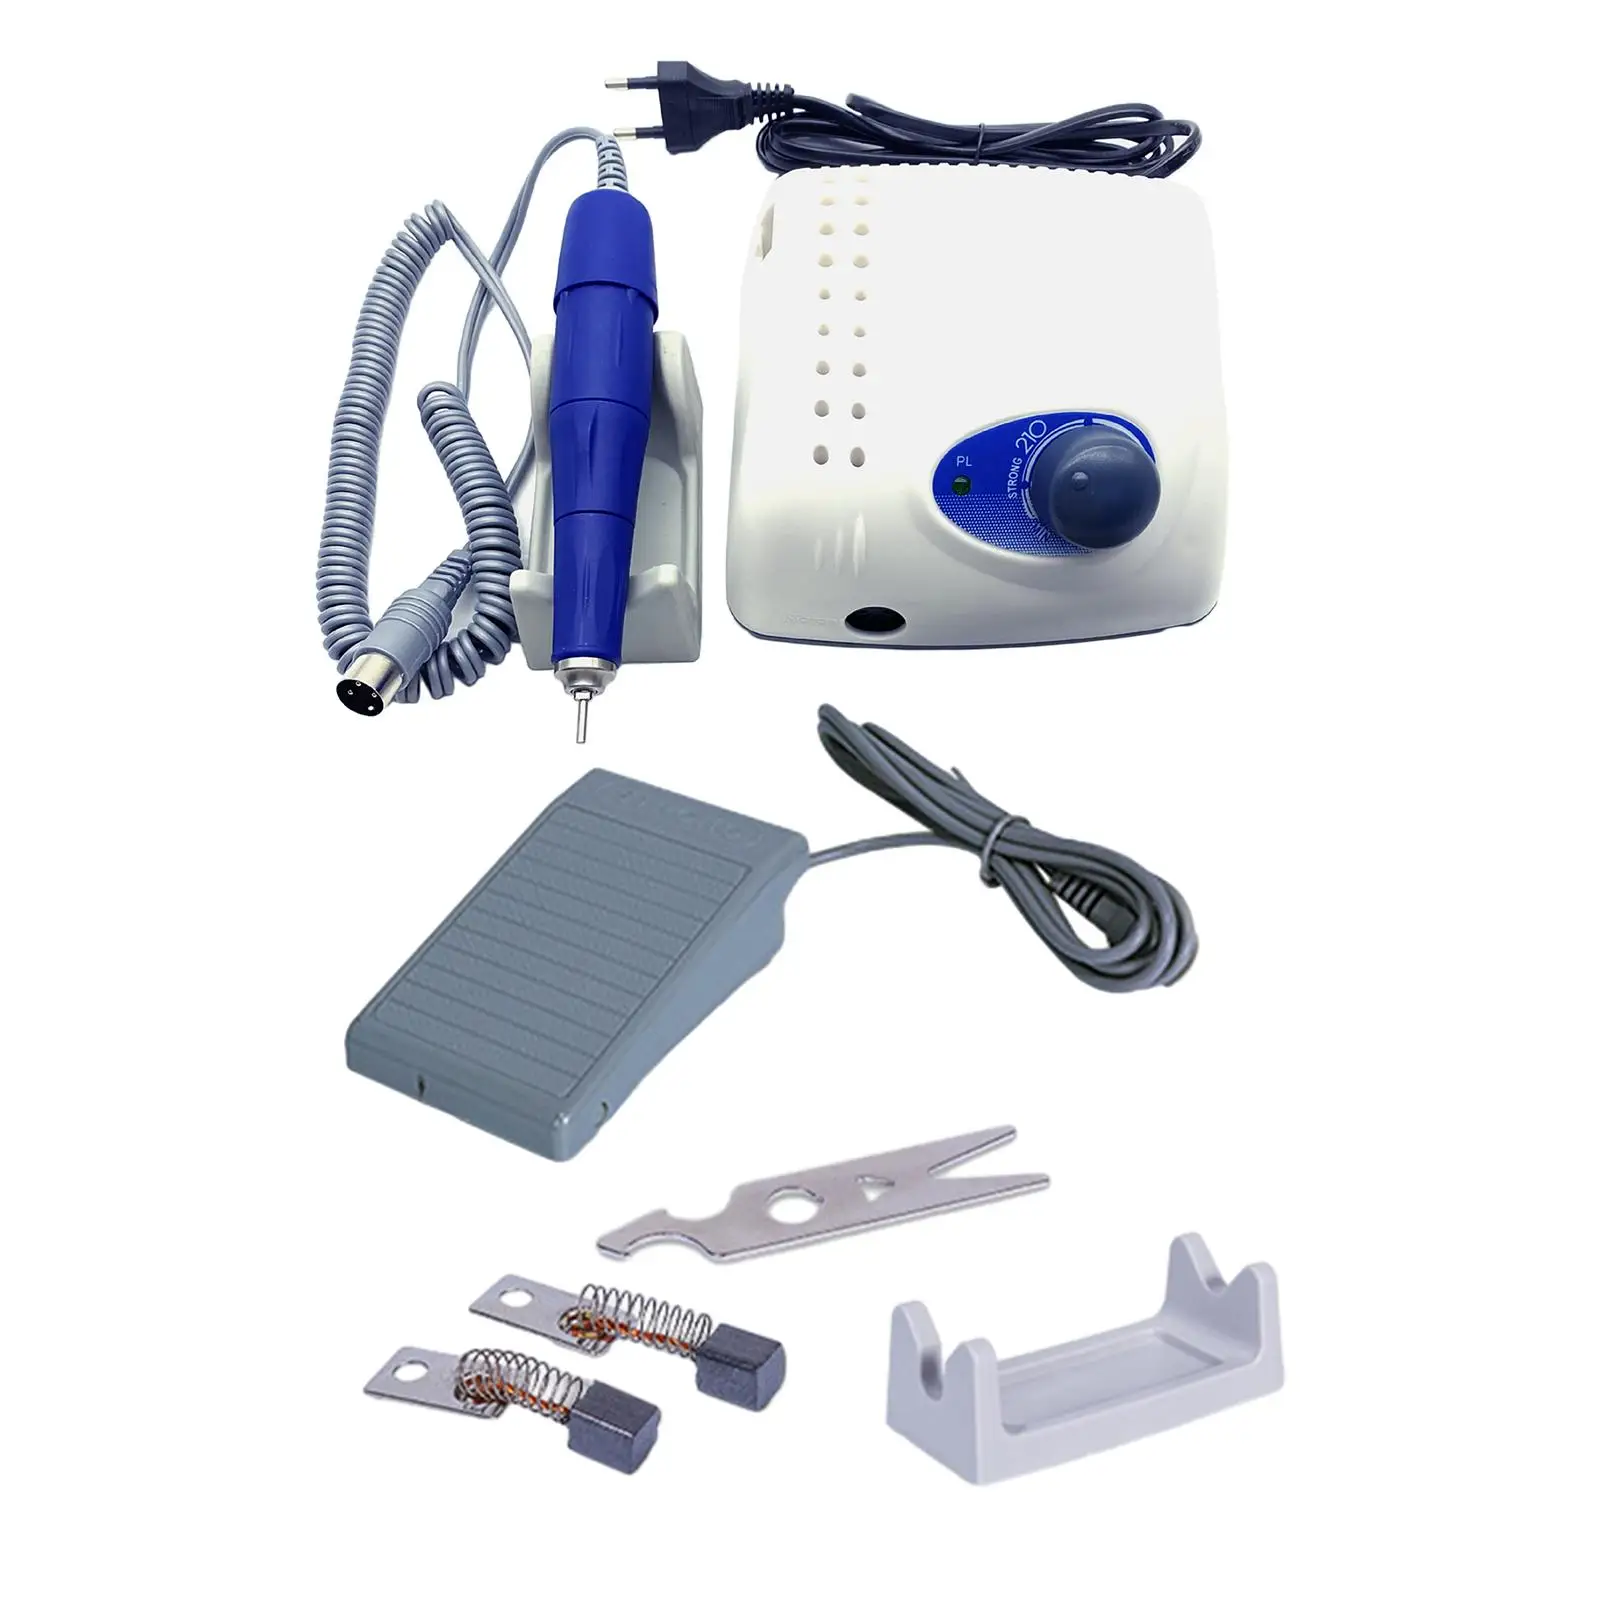 Electric Nail File Drill Machine Salon Home Use Quiet Portable Polishing Tool 35000 RPM for Nail File Shaping Removing Buffing